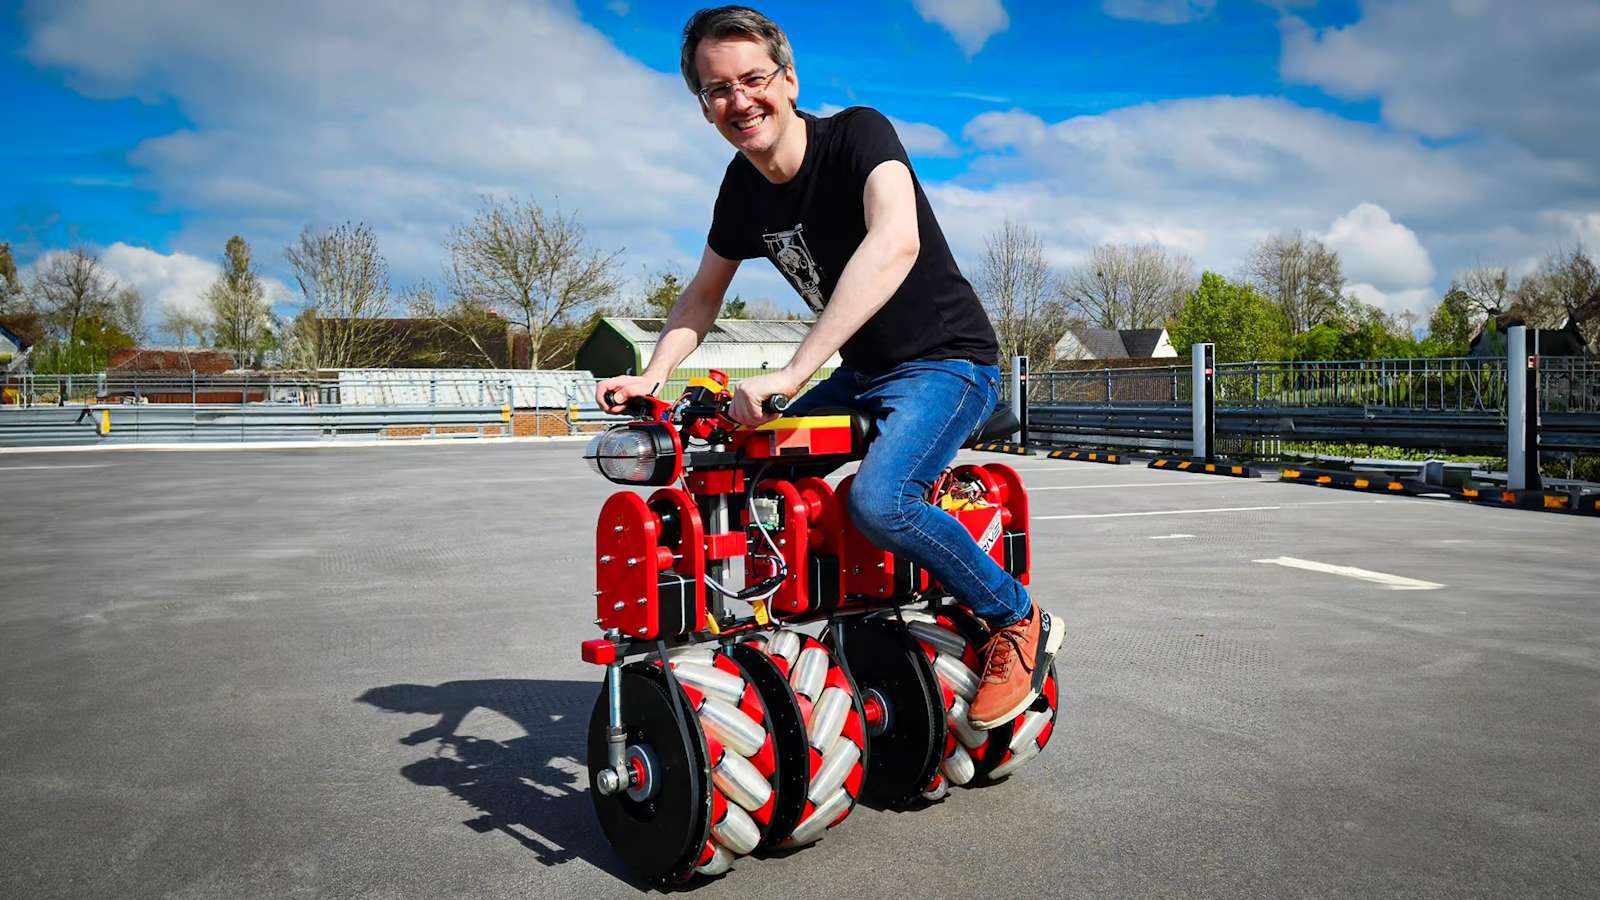 He creates a motorcycle with omnidirectional wheels that rolls in all directions!